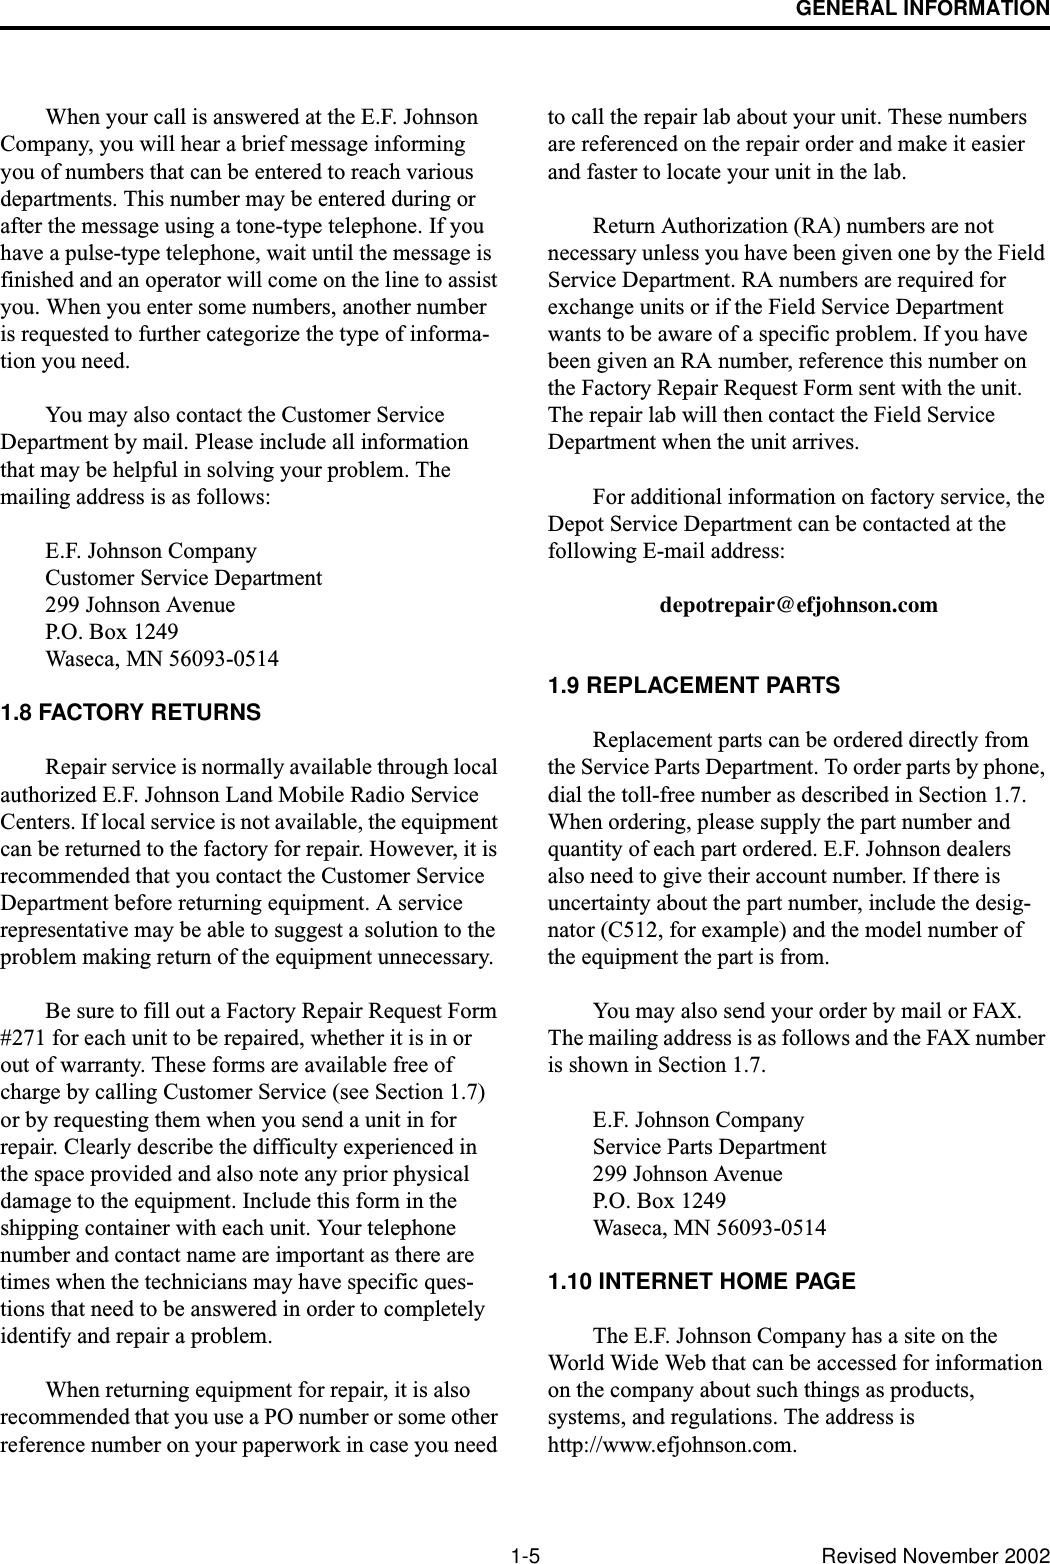 GENERAL INFORMATION1-5 Revised November 2002When your call is answered at the E.F. Johnson Company, you will hear a brief message informing you of numbers that can be entered to reach various departments. This number may be entered during or after the message using a tone-type telephone. If you have a pulse-type telephone, wait until the message is finished and an operator will come on the line to assist you. When you enter some numbers, another number is requested to further categorize the type of informa-tion you need. You may also contact the Customer Service Department by mail. Please include all information that may be helpful in solving your problem. The mailing address is as follows: E.F. Johnson CompanyCustomer Service Department 299 Johnson Avenue P.O. Box 1249 Waseca, MN 56093-0514 1.8 FACTORY RETURNSRepair service is normally available through local authorized E.F. Johnson Land Mobile Radio Service Centers. If local service is not available, the equipment can be returned to the factory for repair. However, it is recommended that you contact the Customer Service Department before returning equipment. A service representative may be able to suggest a solution to the problem making return of the equipment unnecessary. Be sure to fill out a Factory Repair Request Form #271 for each unit to be repaired, whether it is in or out of warranty. These forms are available free of charge by calling Customer Service (see Section 1.7) or by requesting them when you send a unit in for repair. Clearly describe the difficulty experienced in the space provided and also note any prior physical damage to the equipment. Include this form in the shipping container with each unit. Your telephone number and contact name are important as there are times when the technicians may have specific ques-tions that need to be answered in order to completely identify and repair a problem. When returning equipment for repair, it is also recommended that you use a PO number or some other reference number on your paperwork in case you need to call the repair lab about your unit. These numbers are referenced on the repair order and make it easier and faster to locate your unit in the lab. Return Authorization (RA) numbers are not necessary unless you have been given one by the Field Service Department. RA numbers are required for exchange units or if the Field Service Department wants to be aware of a specific problem. If you have been given an RA number, reference this number on the Factory Repair Request Form sent with the unit. The repair lab will then contact the Field Service Department when the unit arrives. For additional information on factory service, the Depot Service Department can be contacted at the following E-mail address: depotrepair@efjohnson.com1.9 REPLACEMENT PARTSReplacement parts can be ordered directly from the Service Parts Department. To order parts by phone, dial the toll-free number as described in Section 1.7. When ordering, please supply the part number and quantity of each part ordered. E.F. Johnson dealers also need to give their account number. If there is uncertainty about the part number, include the desig-nator (C512, for example) and the model number of the equipment the part is from. You may also send your order by mail or FAX. The mailing address is as follows and the FAX number is shown in Section 1.7. E.F. Johnson CompanyService Parts Department 299 Johnson Avenue P.O. Box 1249 Waseca, MN 56093-05141.10 INTERNET HOME PAGEThe E.F. Johnson Company has a site on the World Wide Web that can be accessed for information on the company about such things as products, systems, and regulations. The address is http://www.efjohnson.com.